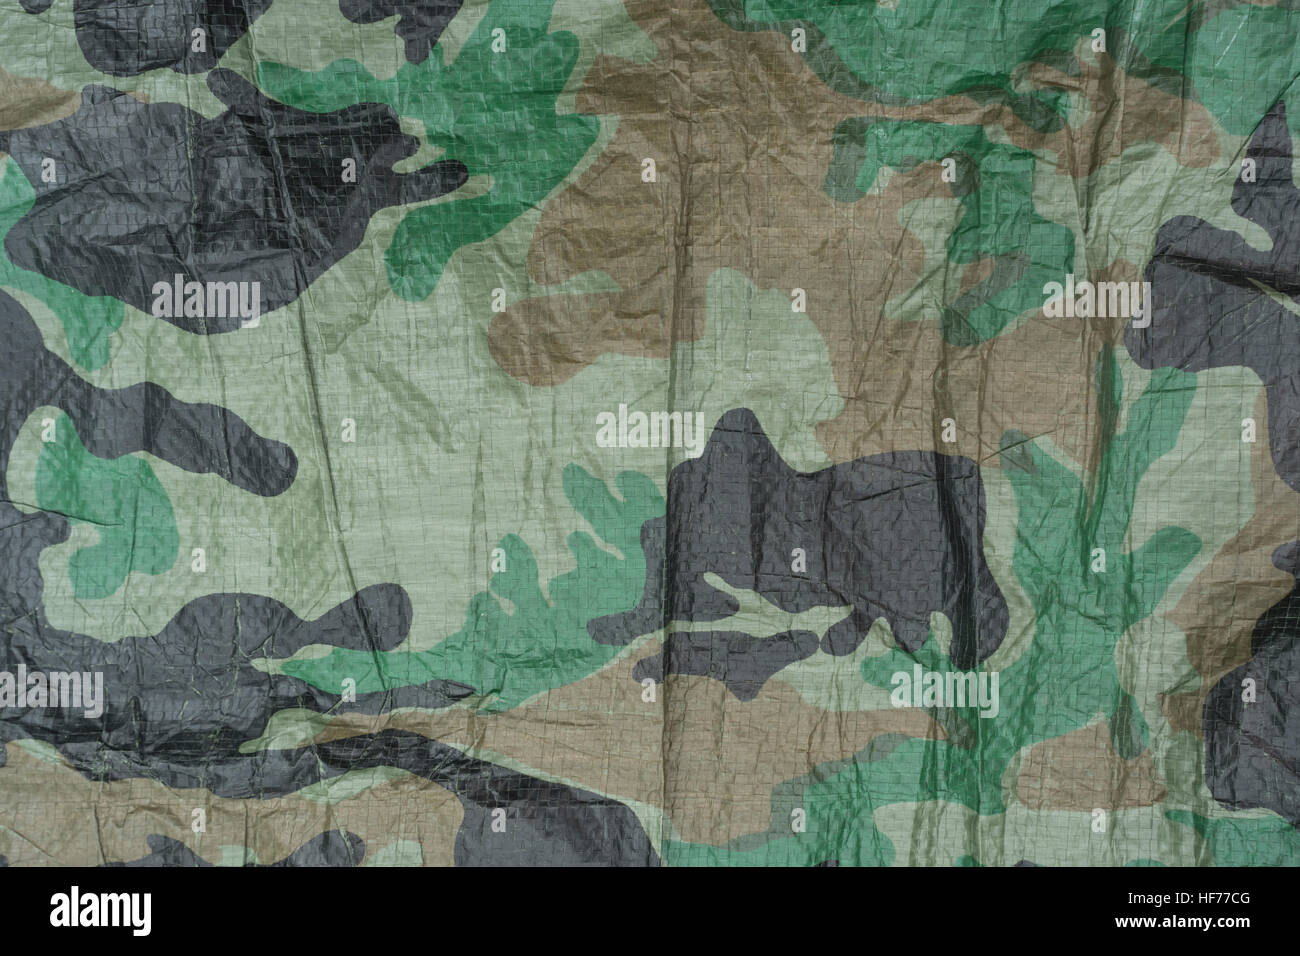 Section of green camouflage ground sheet material, which can also be used to build a survival shelter / emergency shelter against the elements. Stock Photo